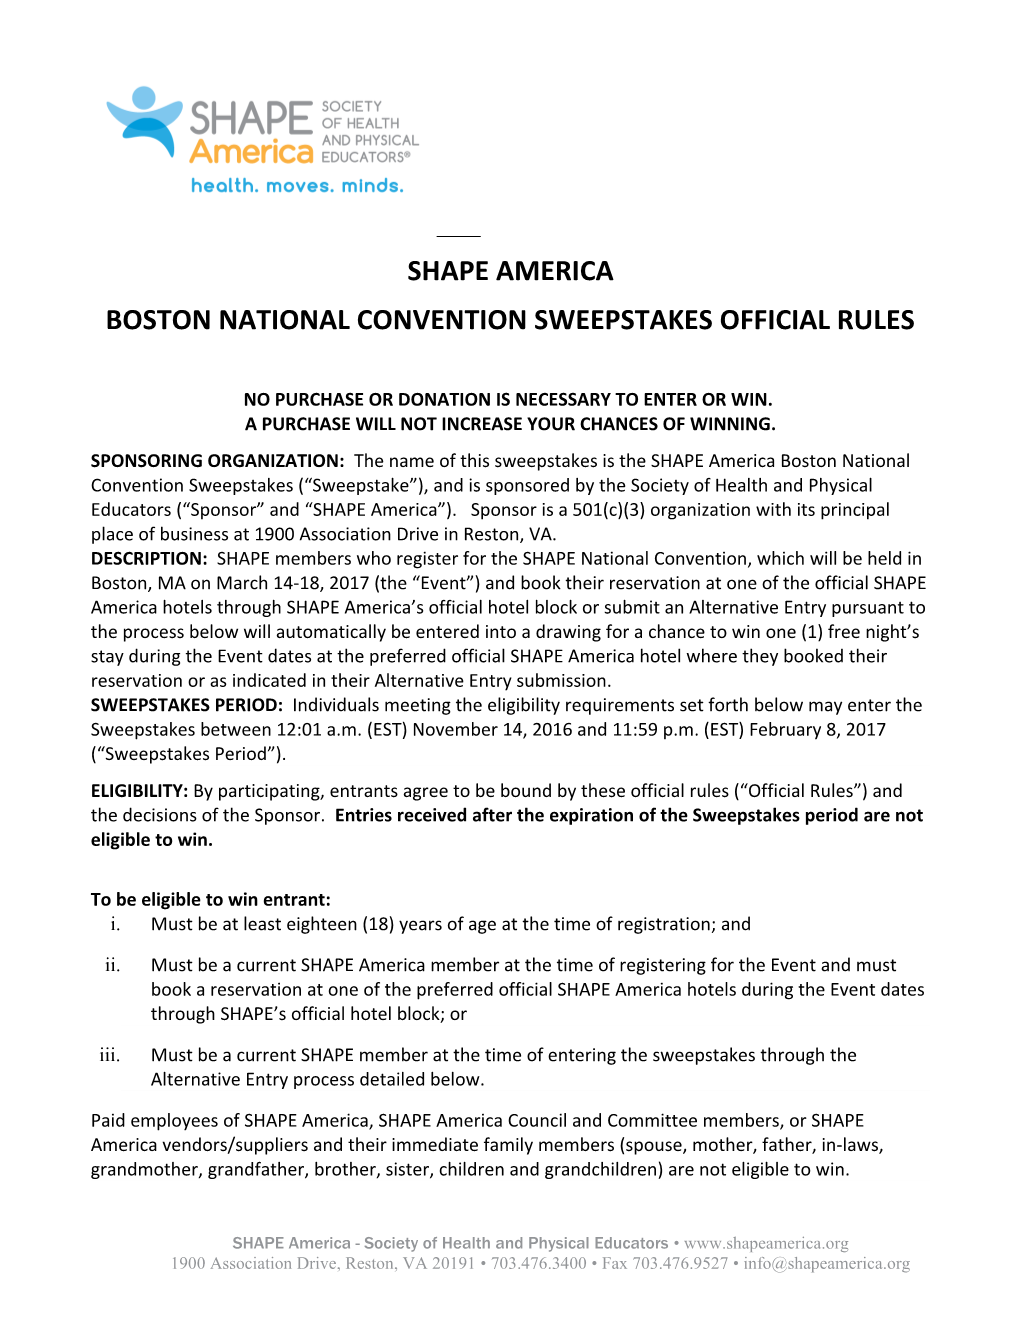 Boston National Convention Sweepstakes Official Rules